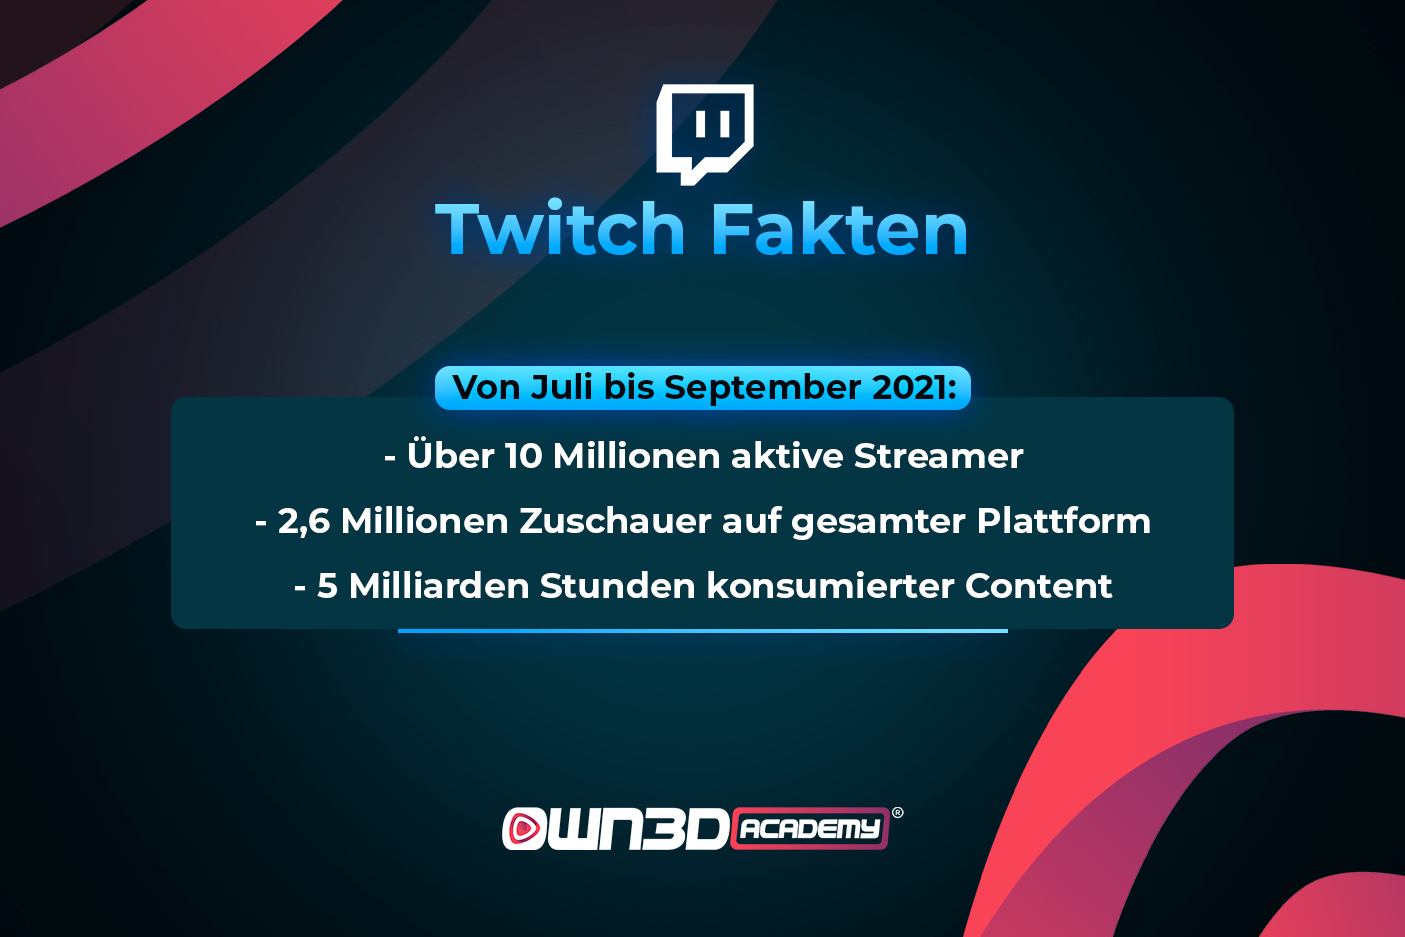 TWITCH_History-and-Keyfacts_GER_twitch-facts.jpg